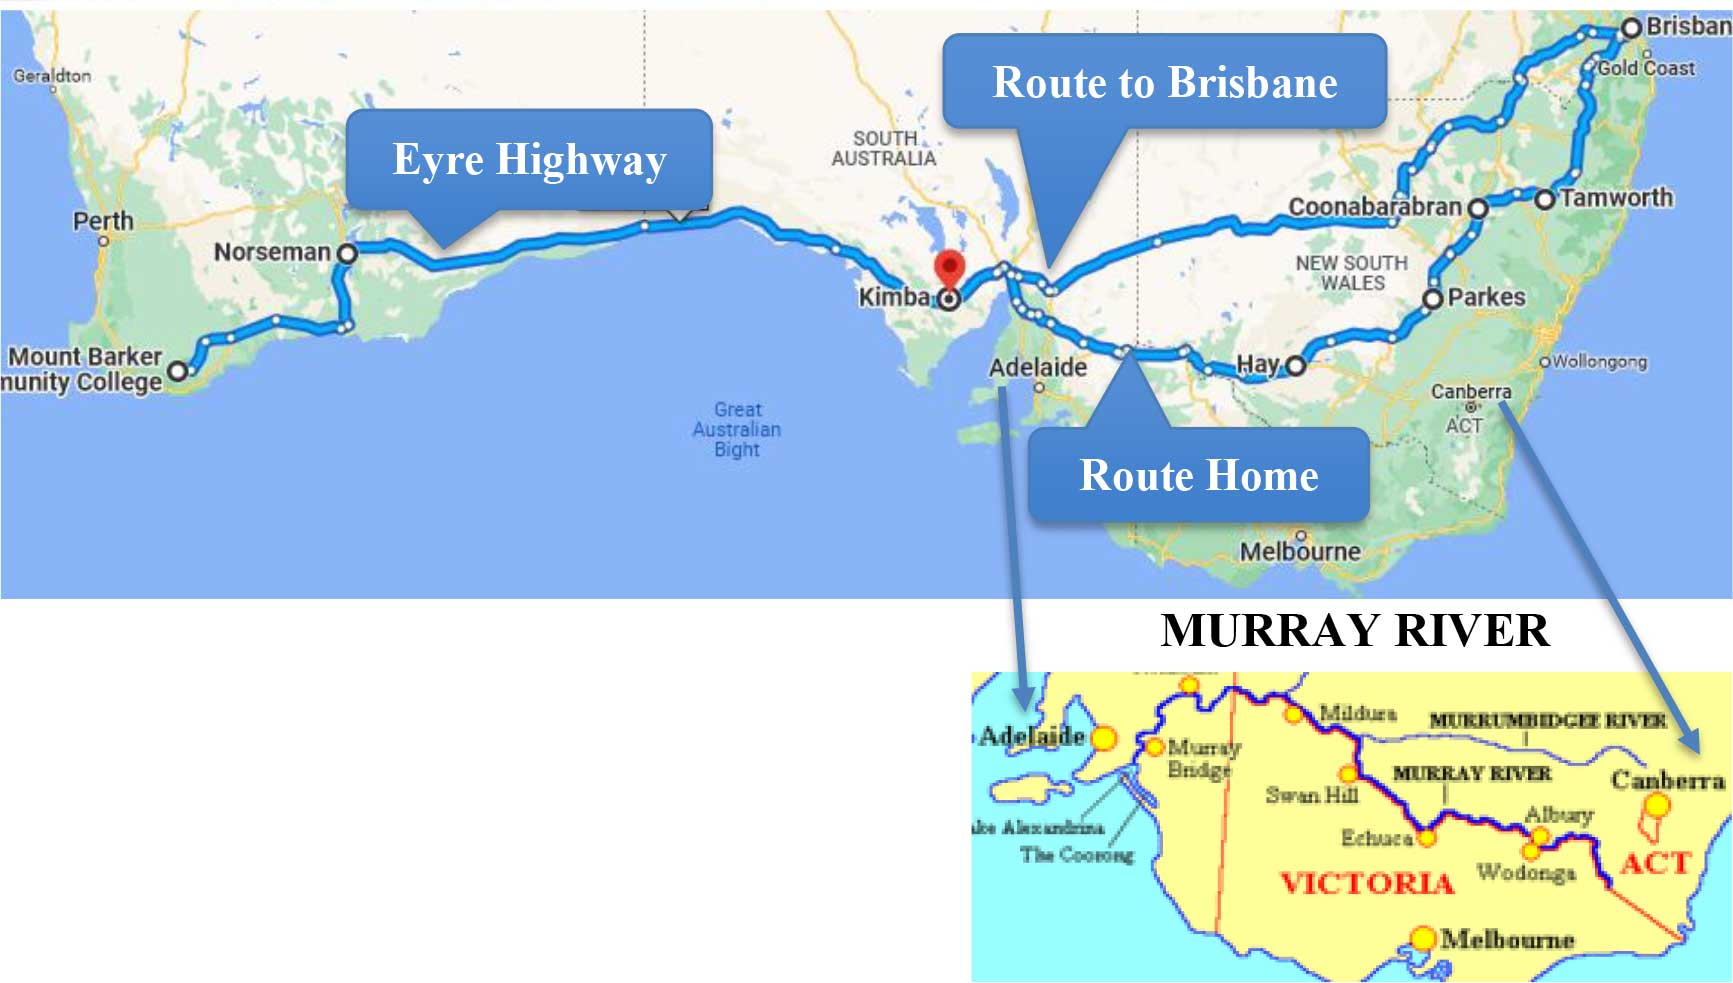 Two maps showing the routes from Mount Barker to Brisbane on the way there and following the Murray River on the way back